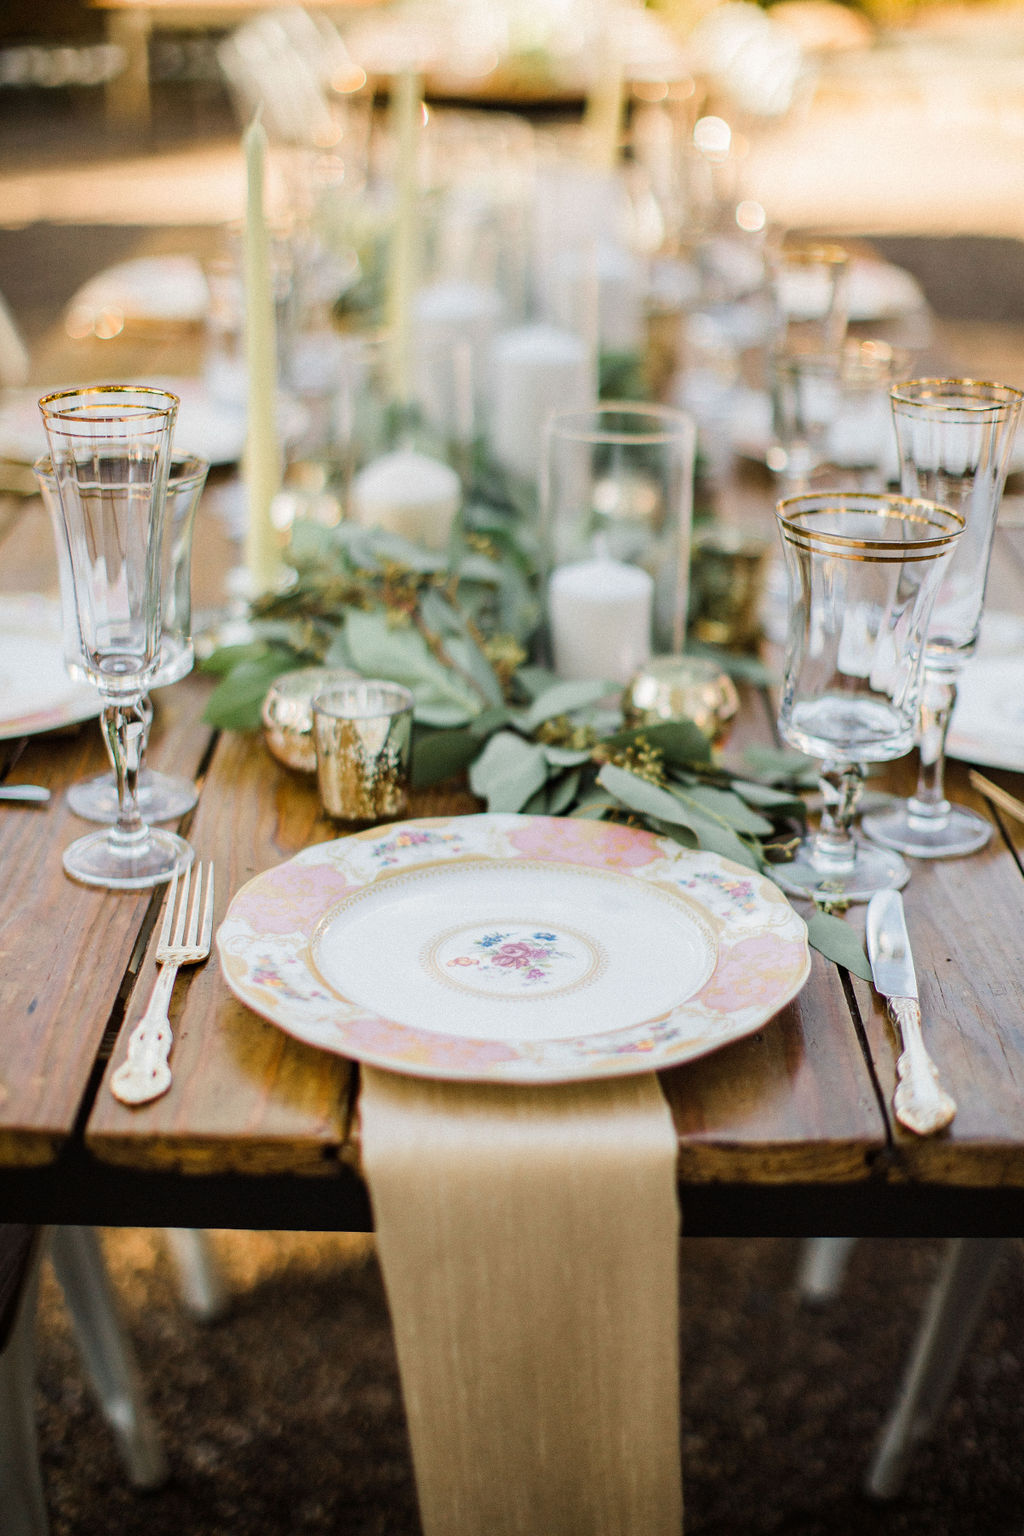 Intimate Vintage Garden Wedding / Planning by Lucky Day Events Co. / Photo by Danielle Riley / The Parlour at Mann's Chapel